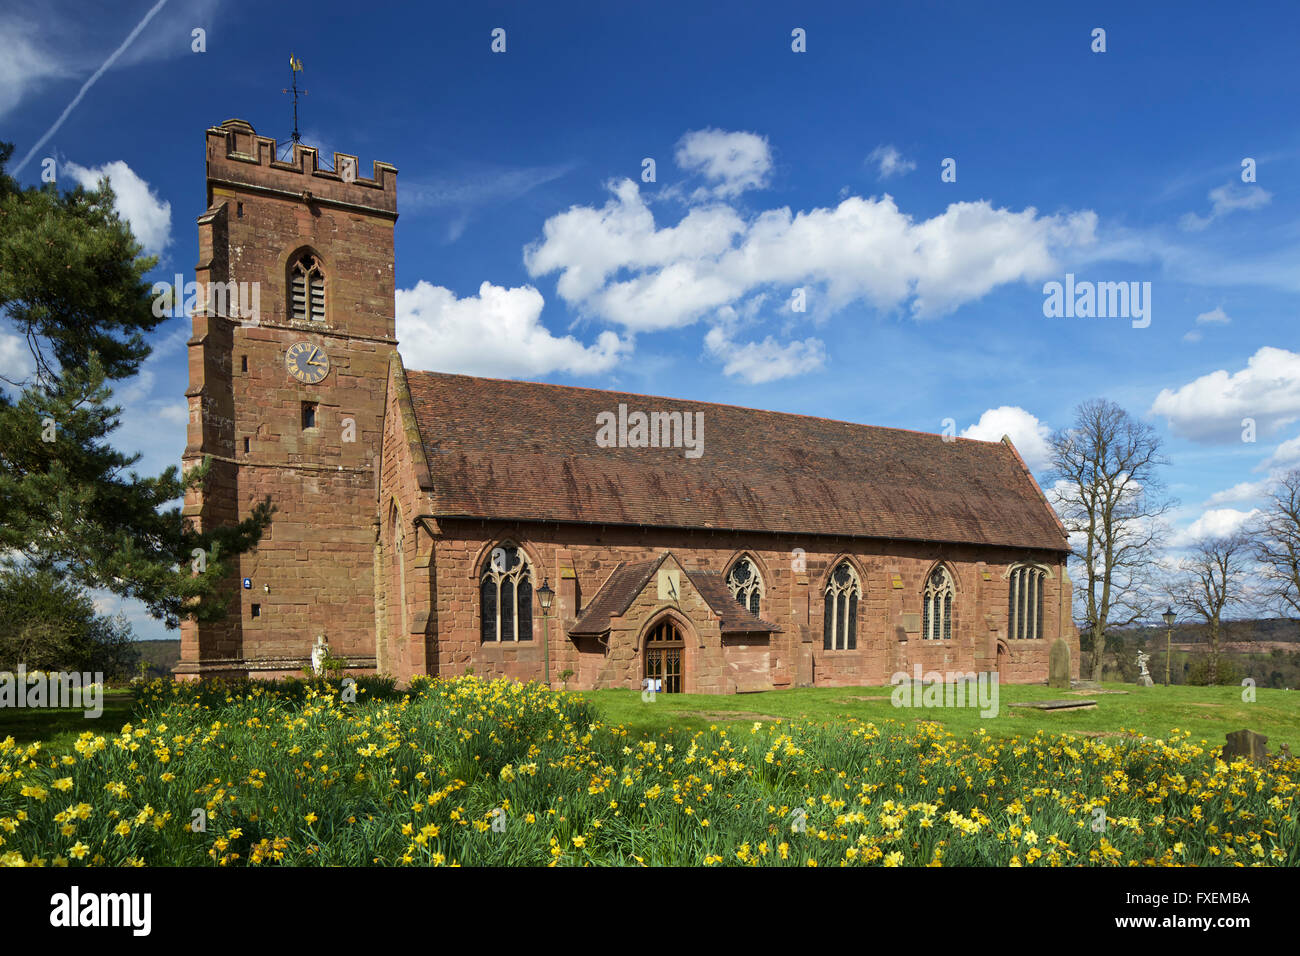 St Peters Church Kinver South Staffordshire England UK Stock Photo